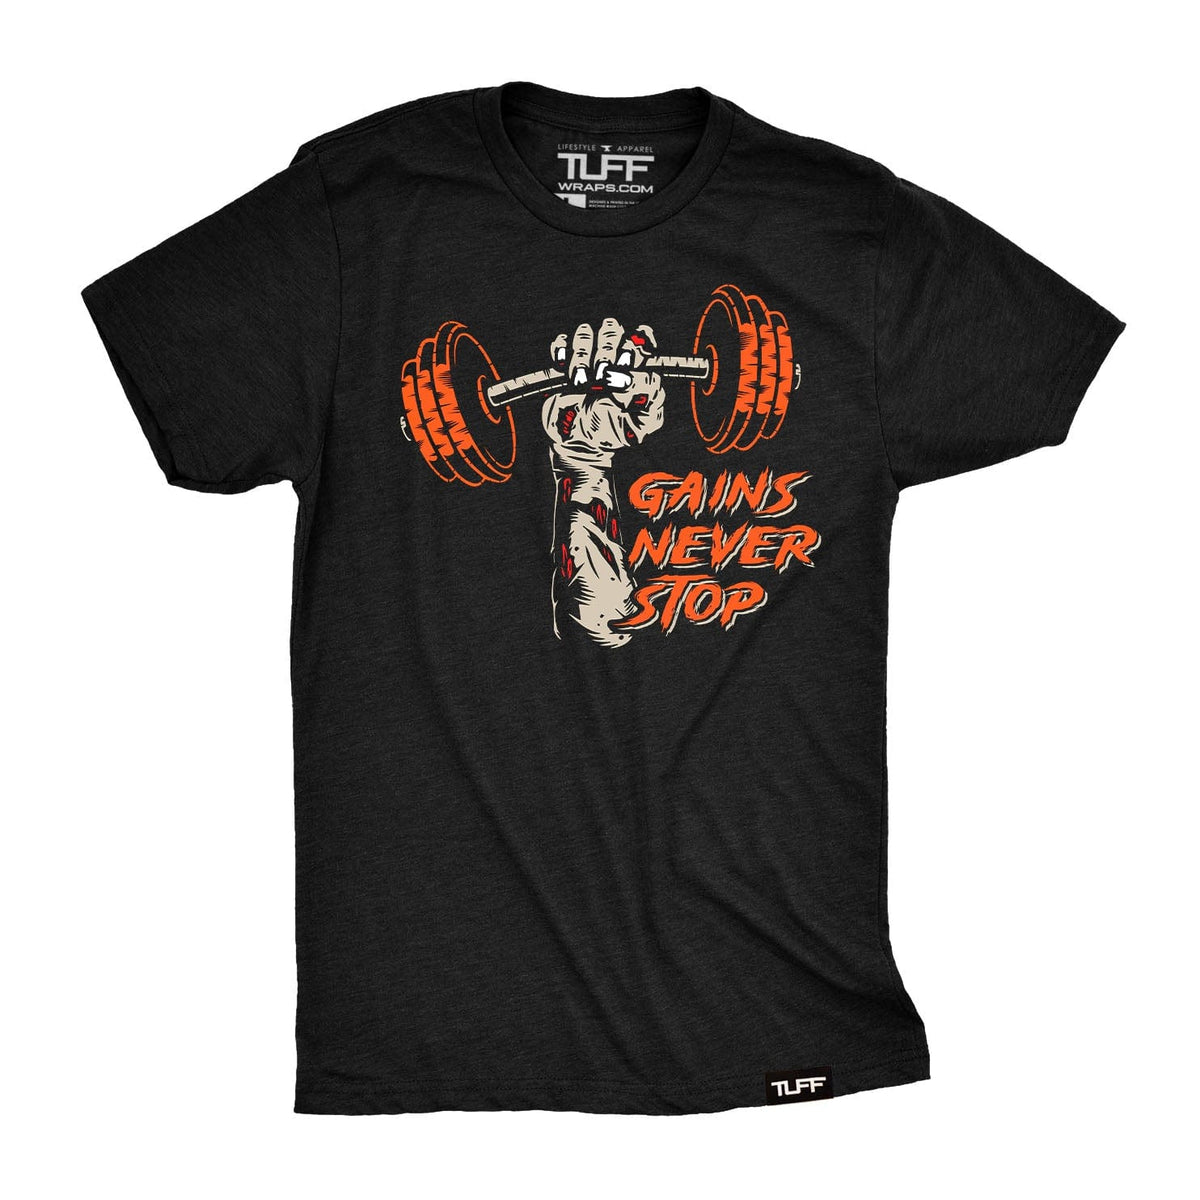 Gains Never Stop Tee T-shirt